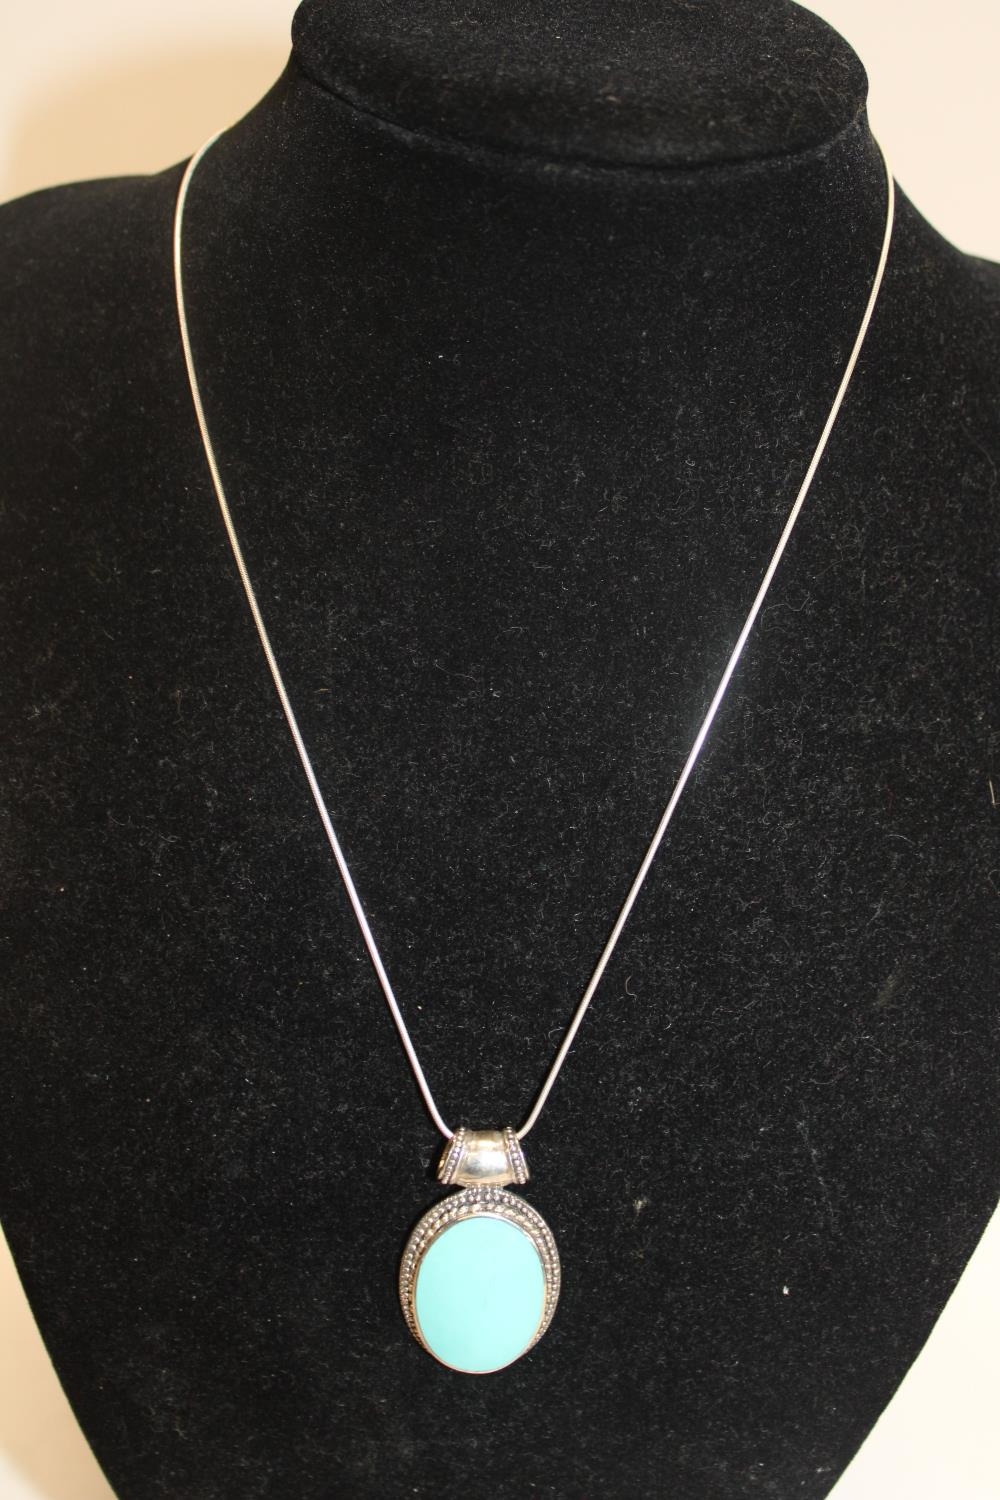 A 925 silver necklace & locket with a turquoise decoration